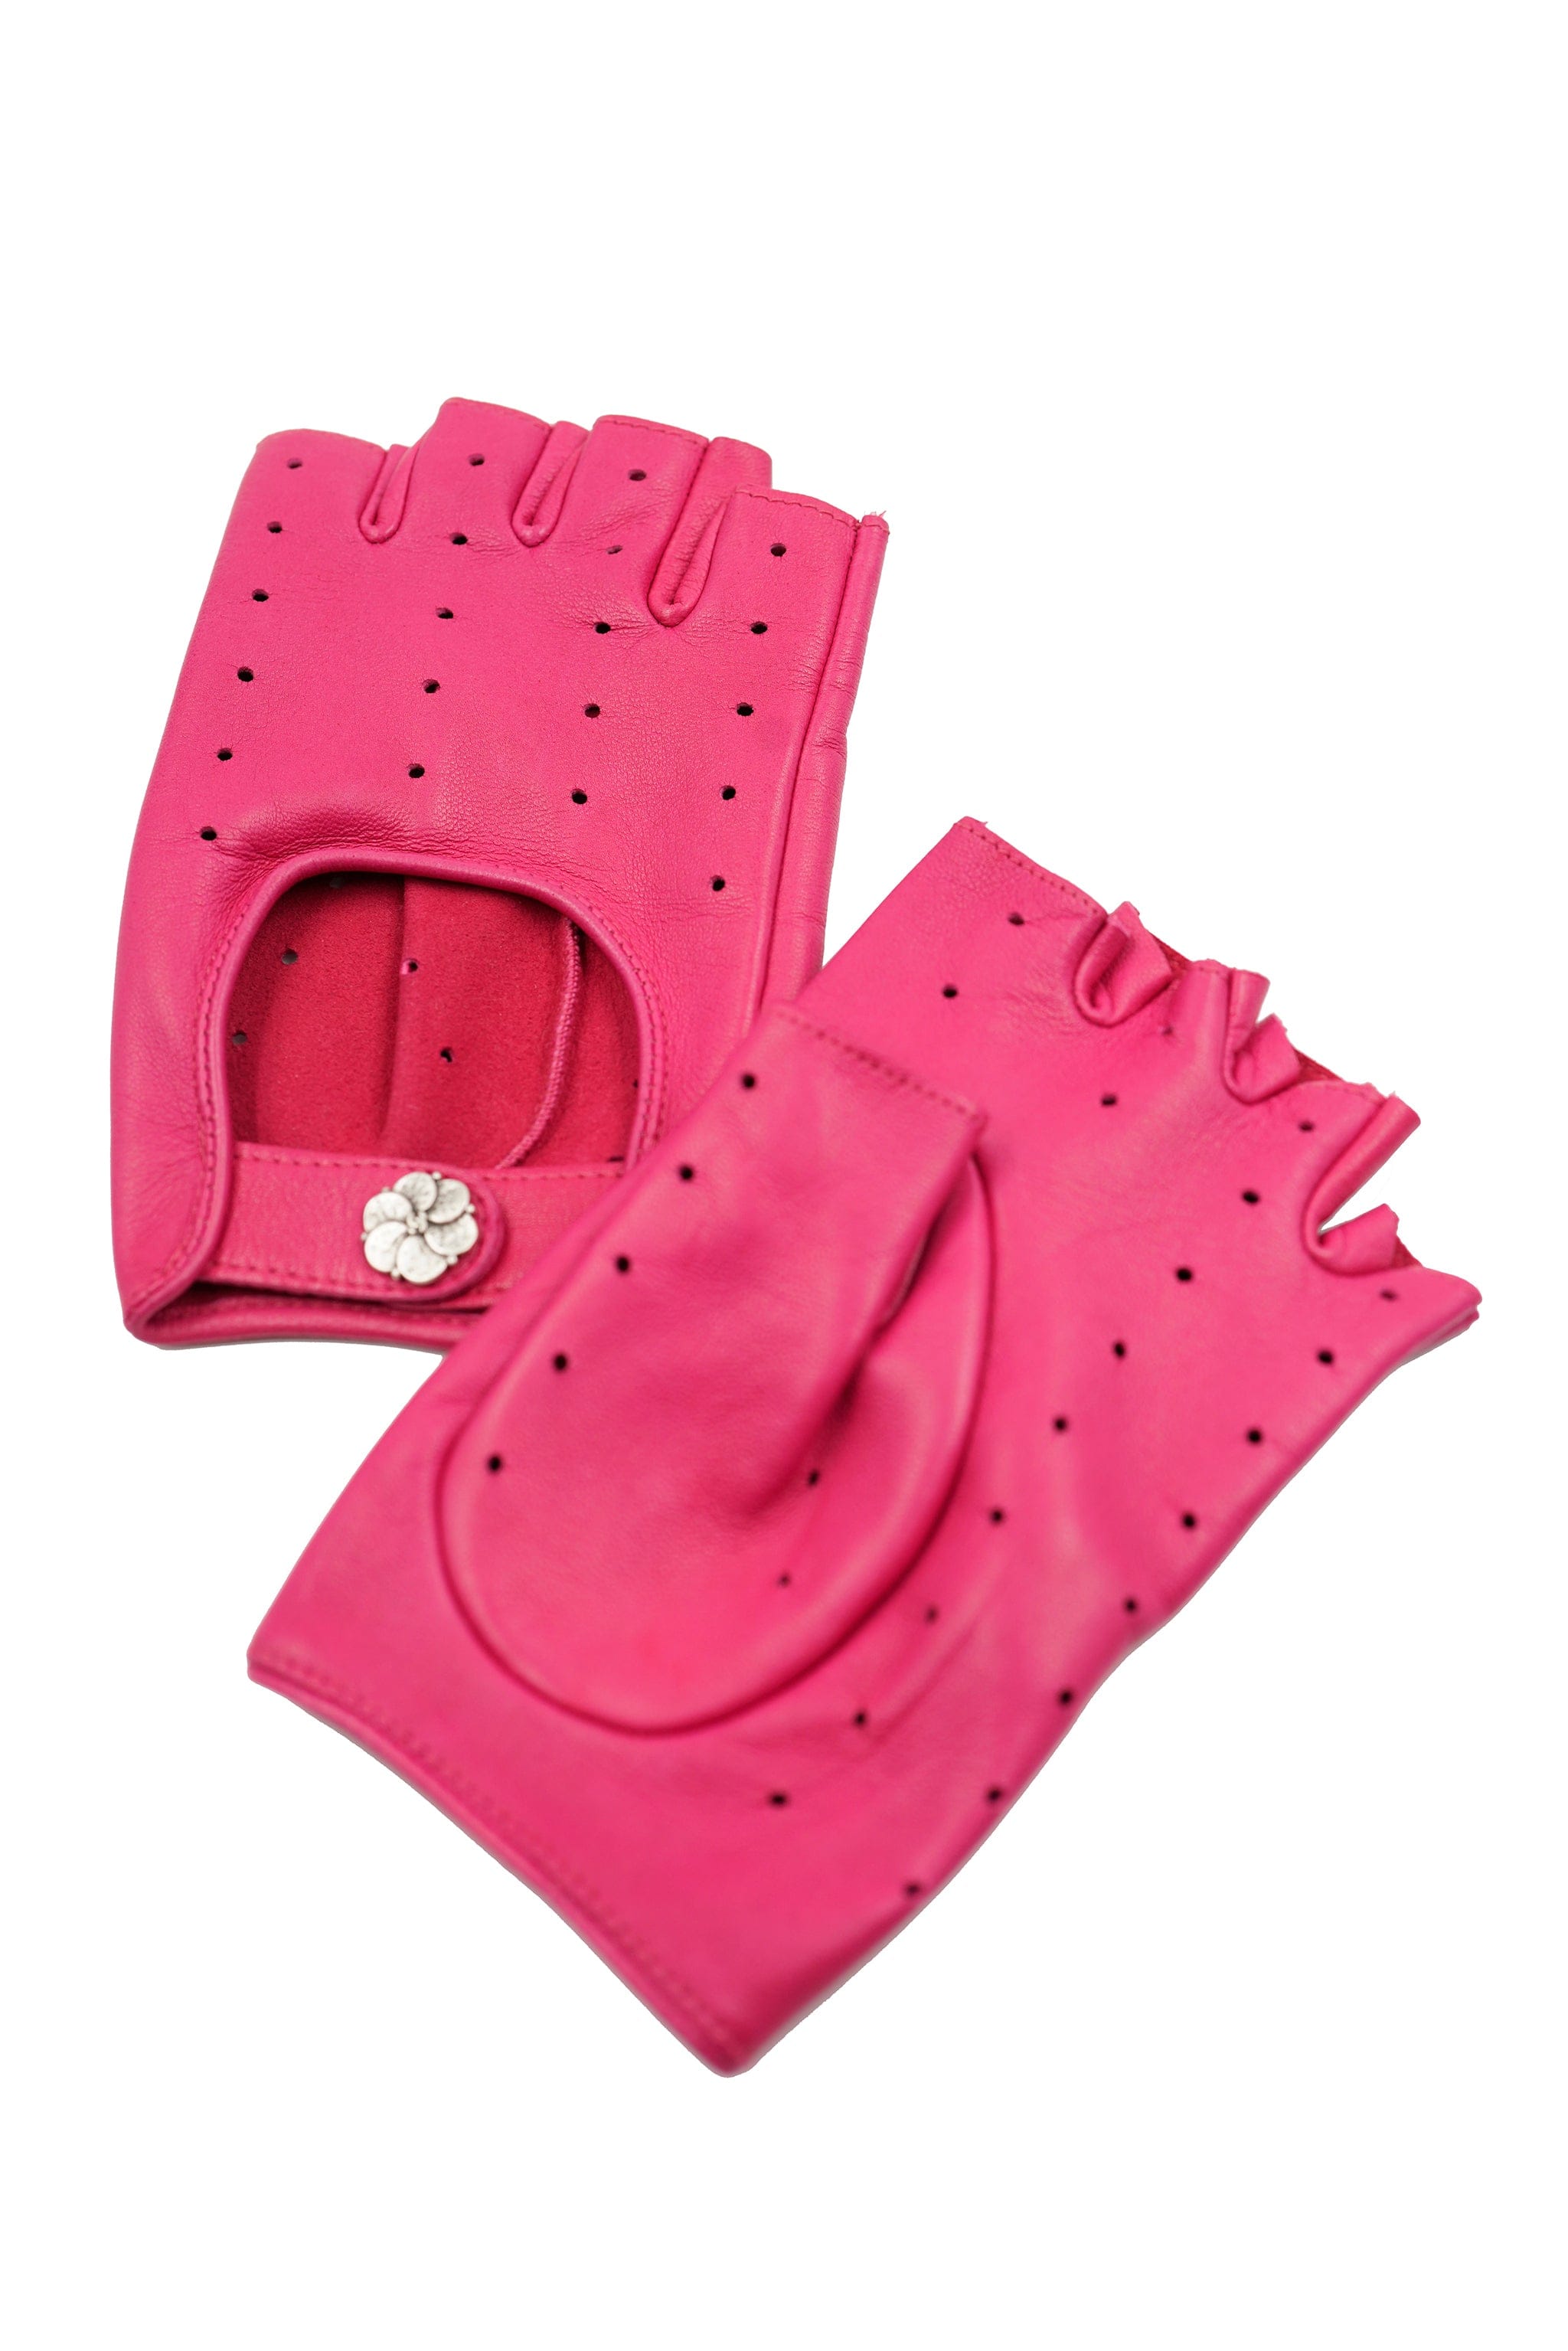 Chanel Pink Fingerless Gloves size 7 - AWC1908